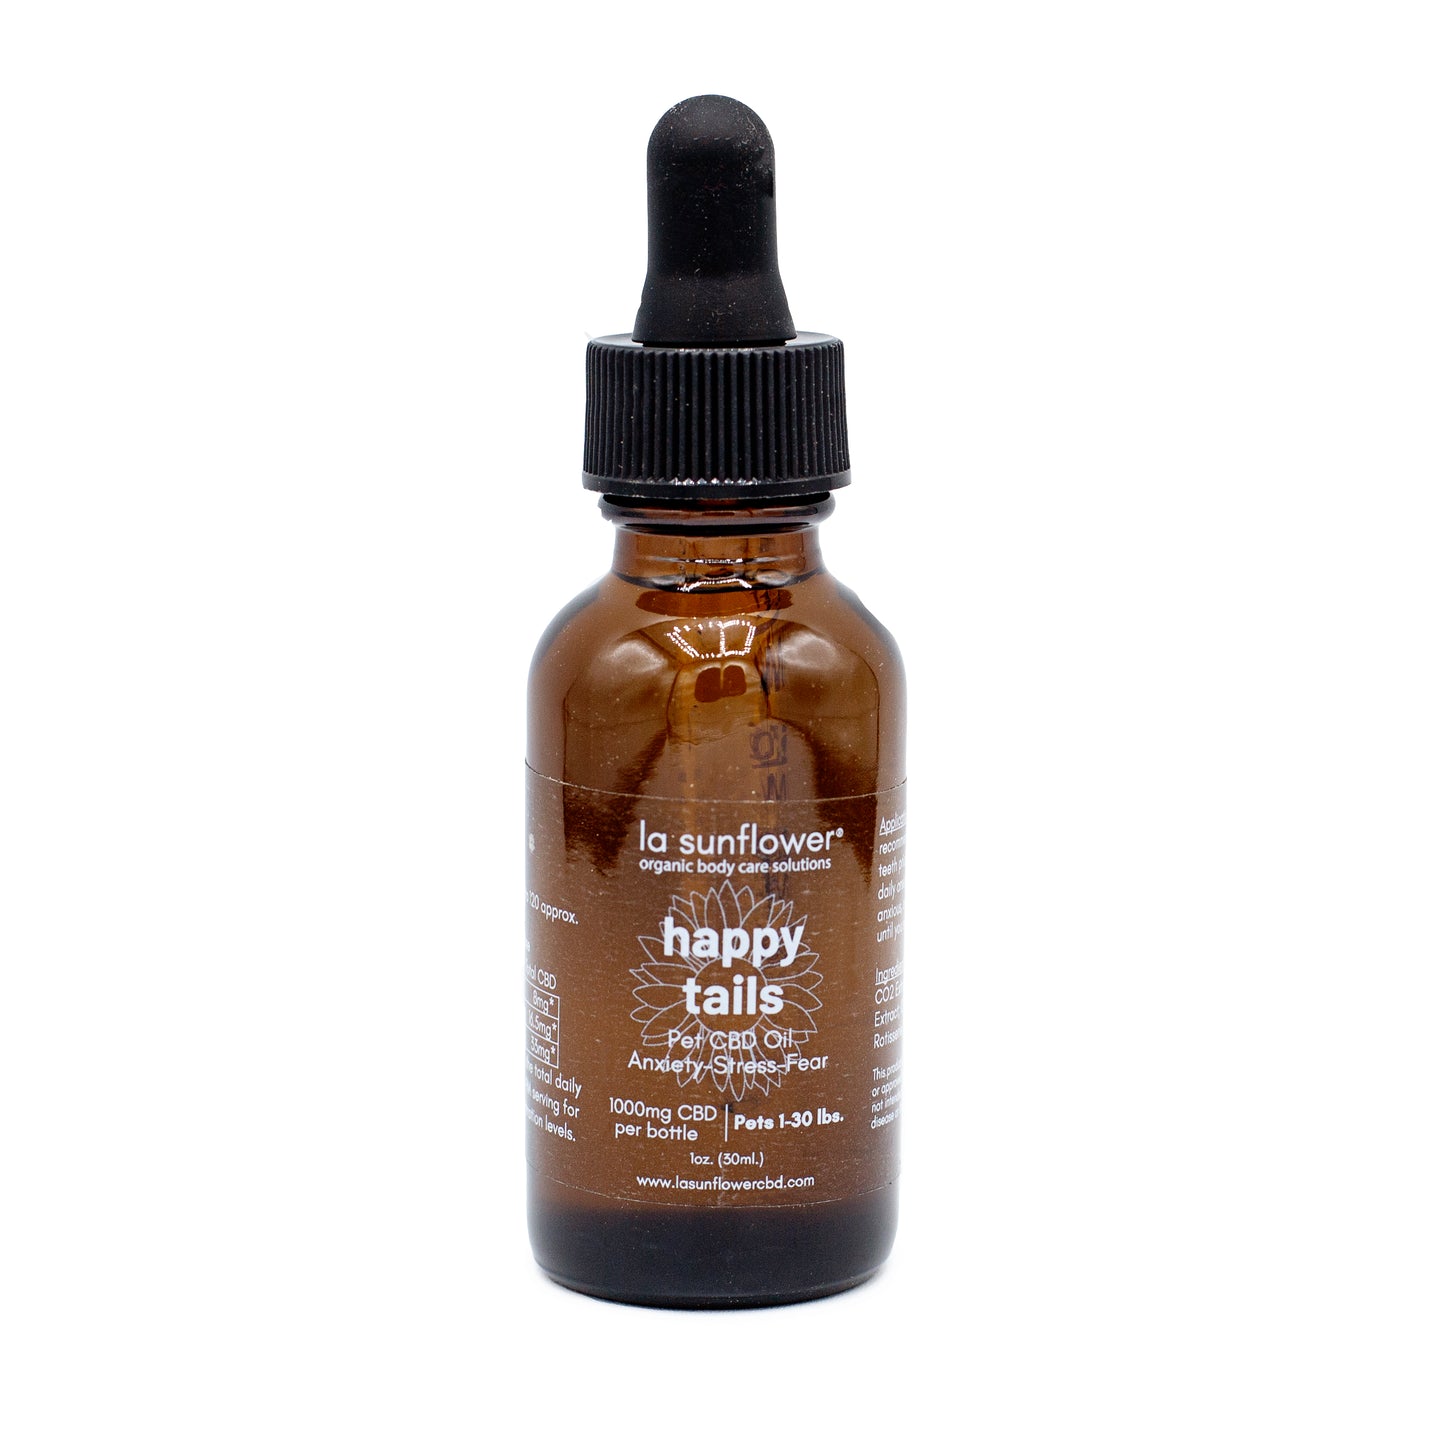 Happy Tails Pet CBD Oil: 1000mg/CBD-Formulated for Pets Under 30 LBS.